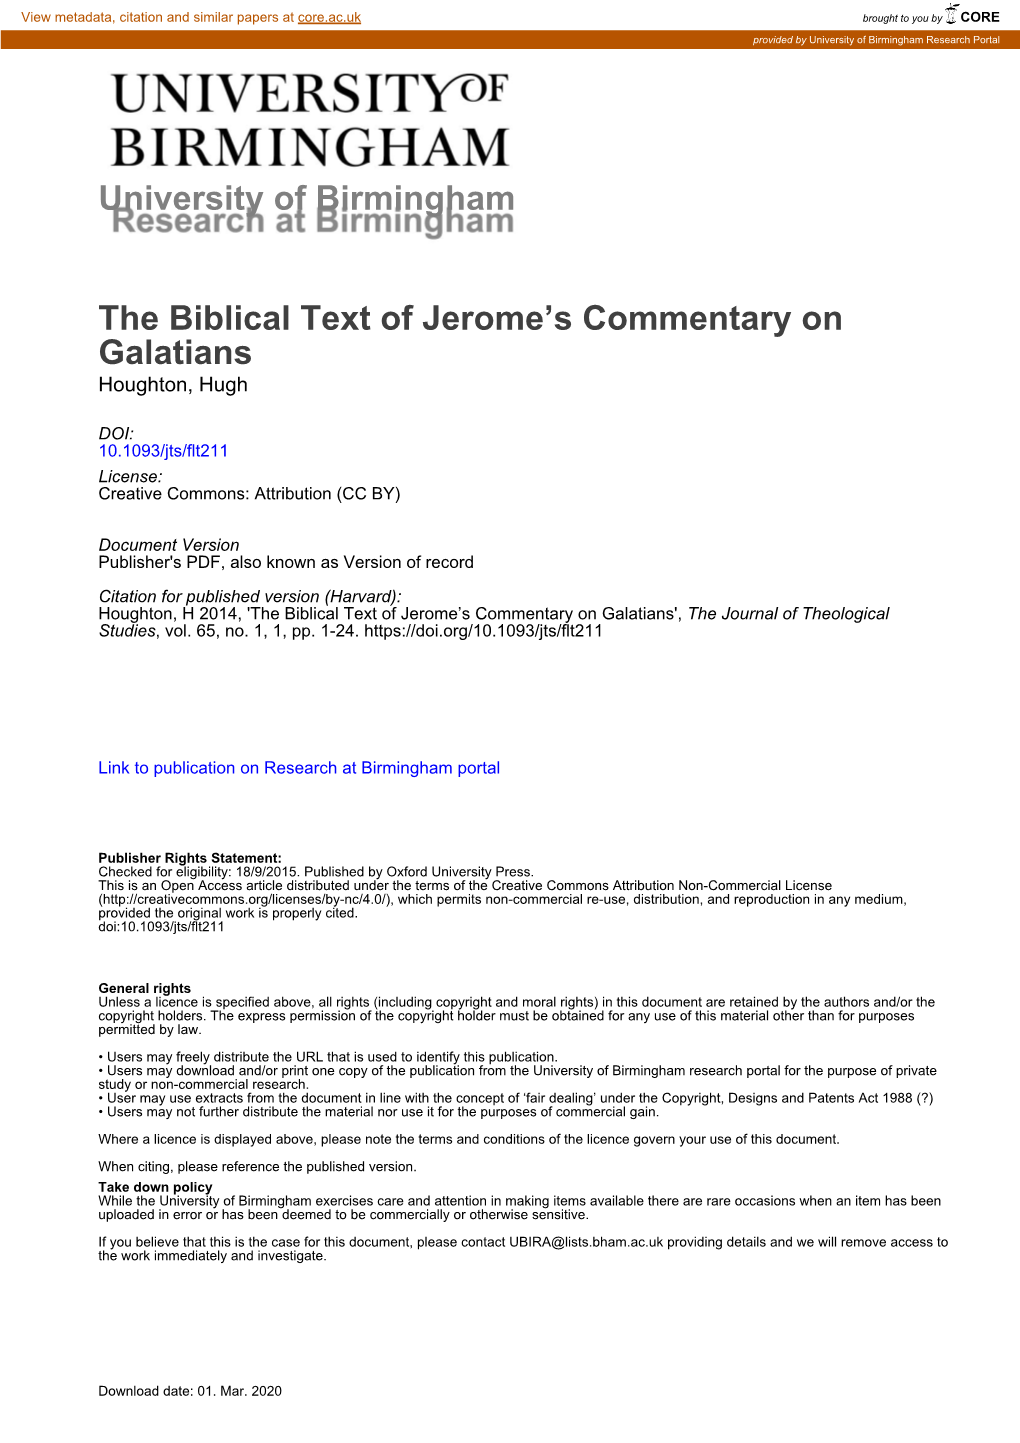 University of Birmingham the Biblical Text of Jerome's Commentary on Galatians